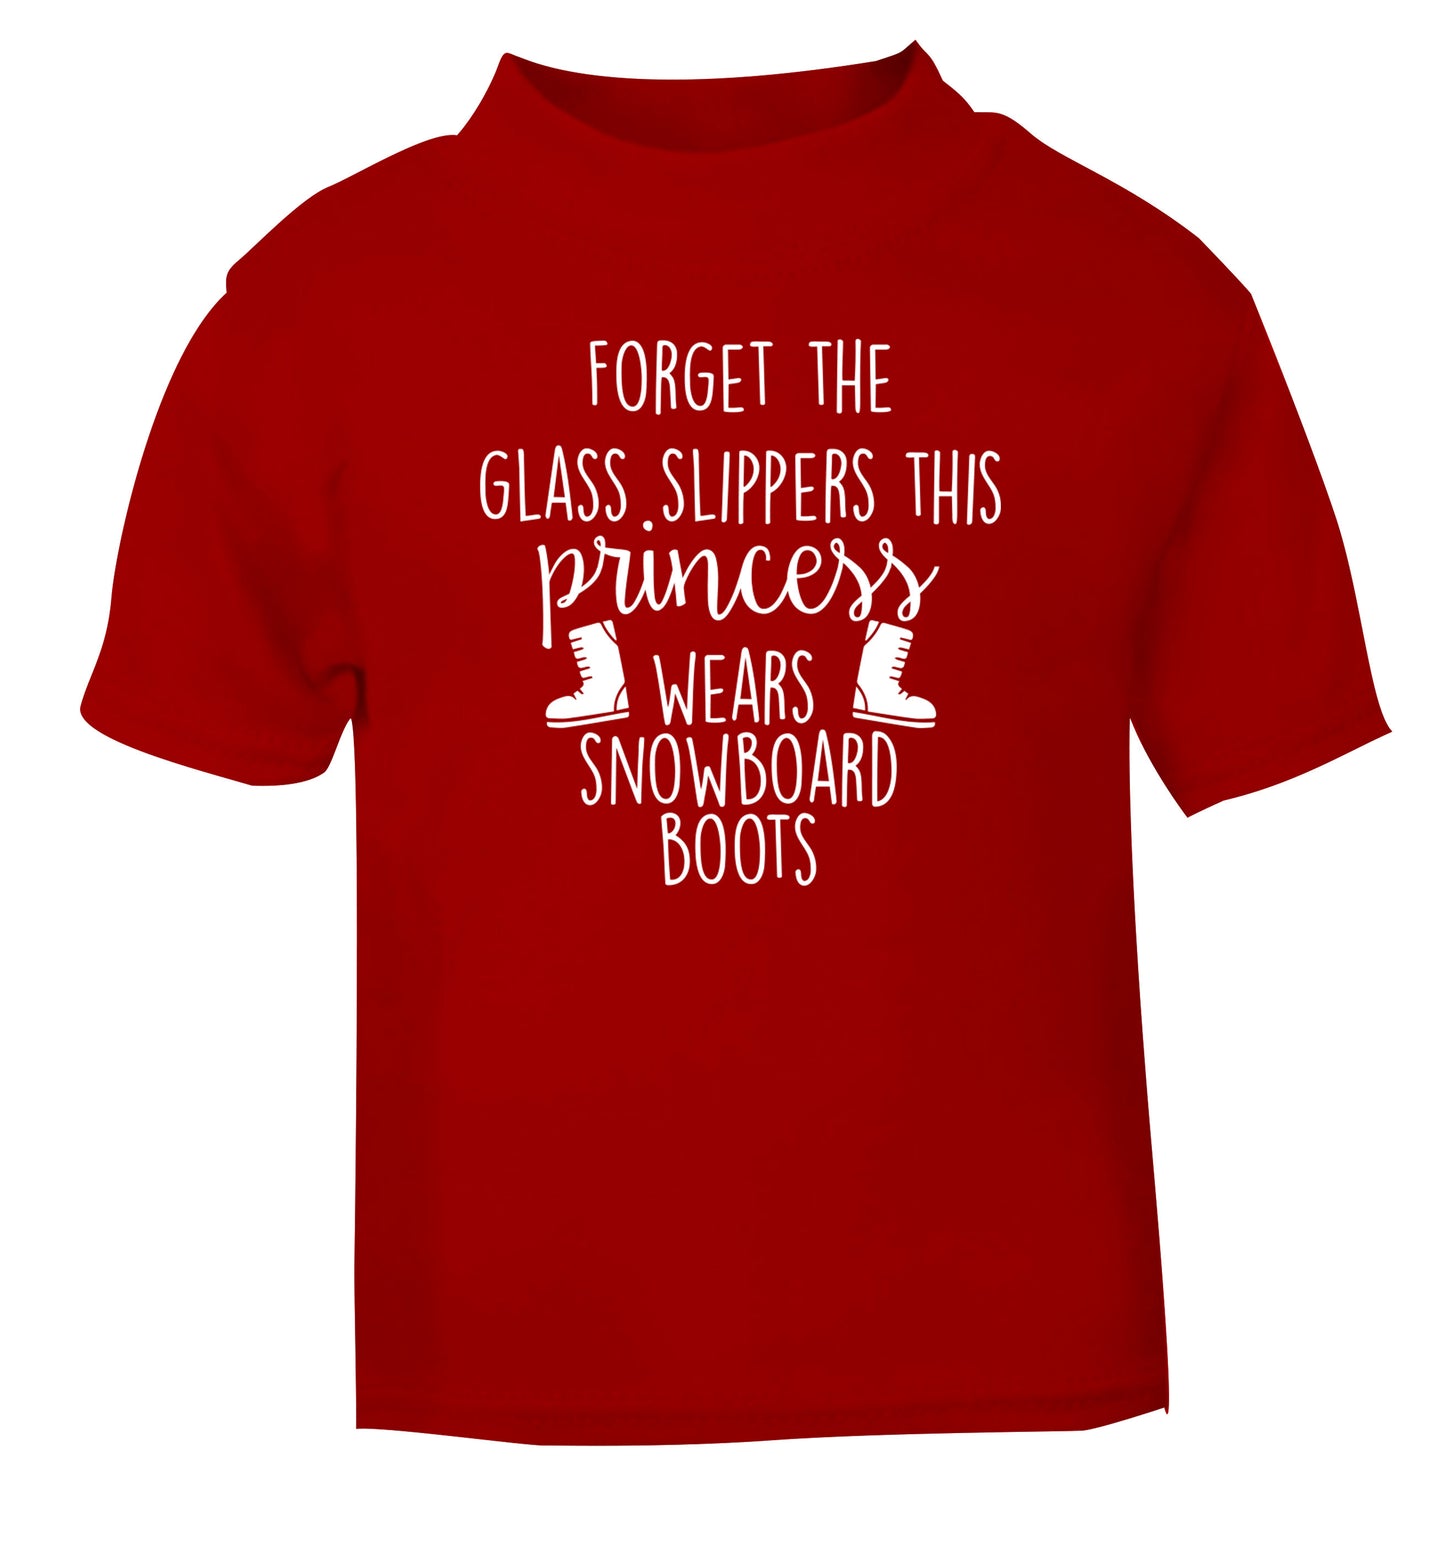 Forget the glass slippers this princess wears snowboard boots red Baby Toddler Tshirt 2 Years